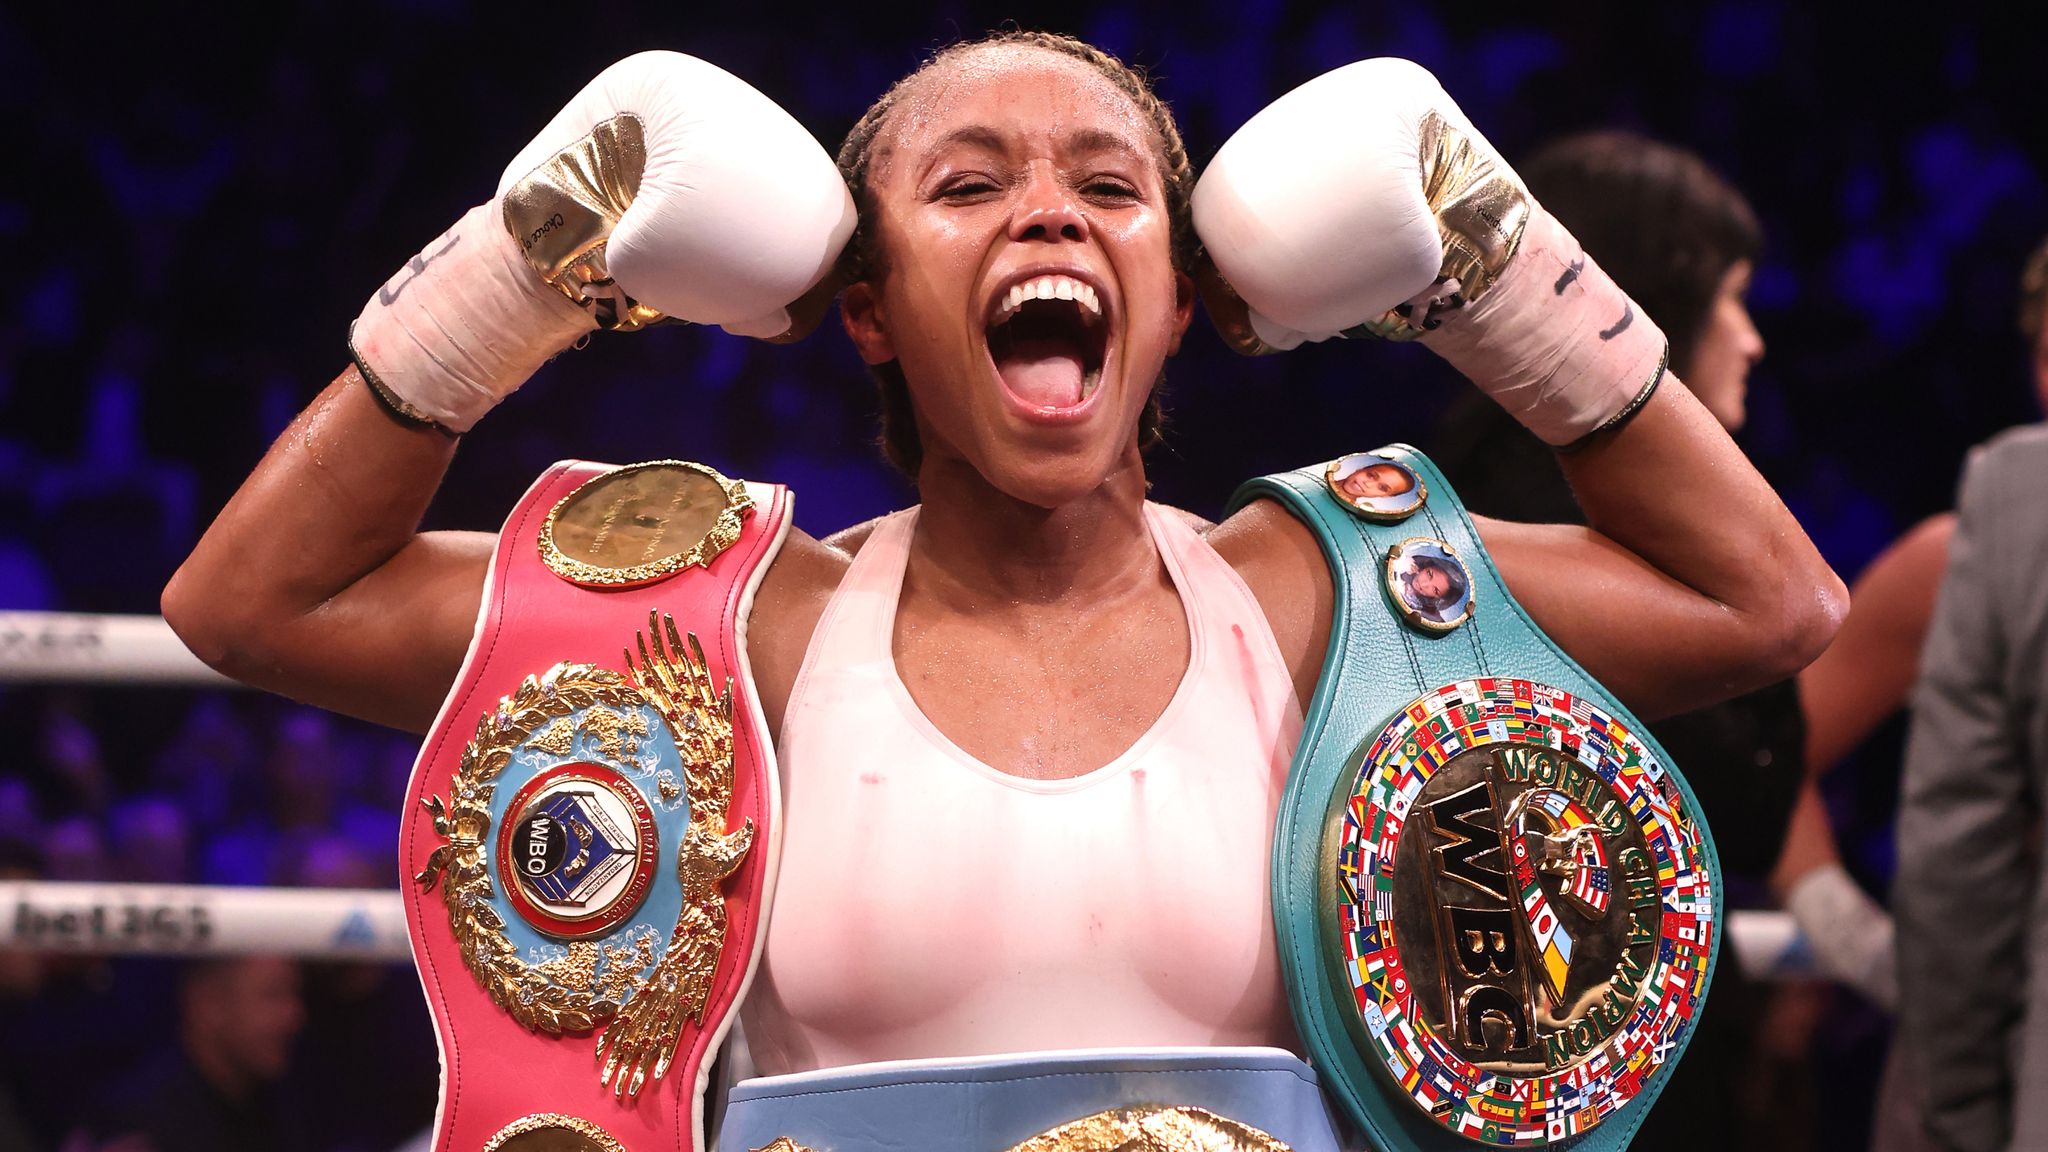 EXCLUSIVE: Natasha Jonas details comeback from Obenauf defeat to becoming unified champion